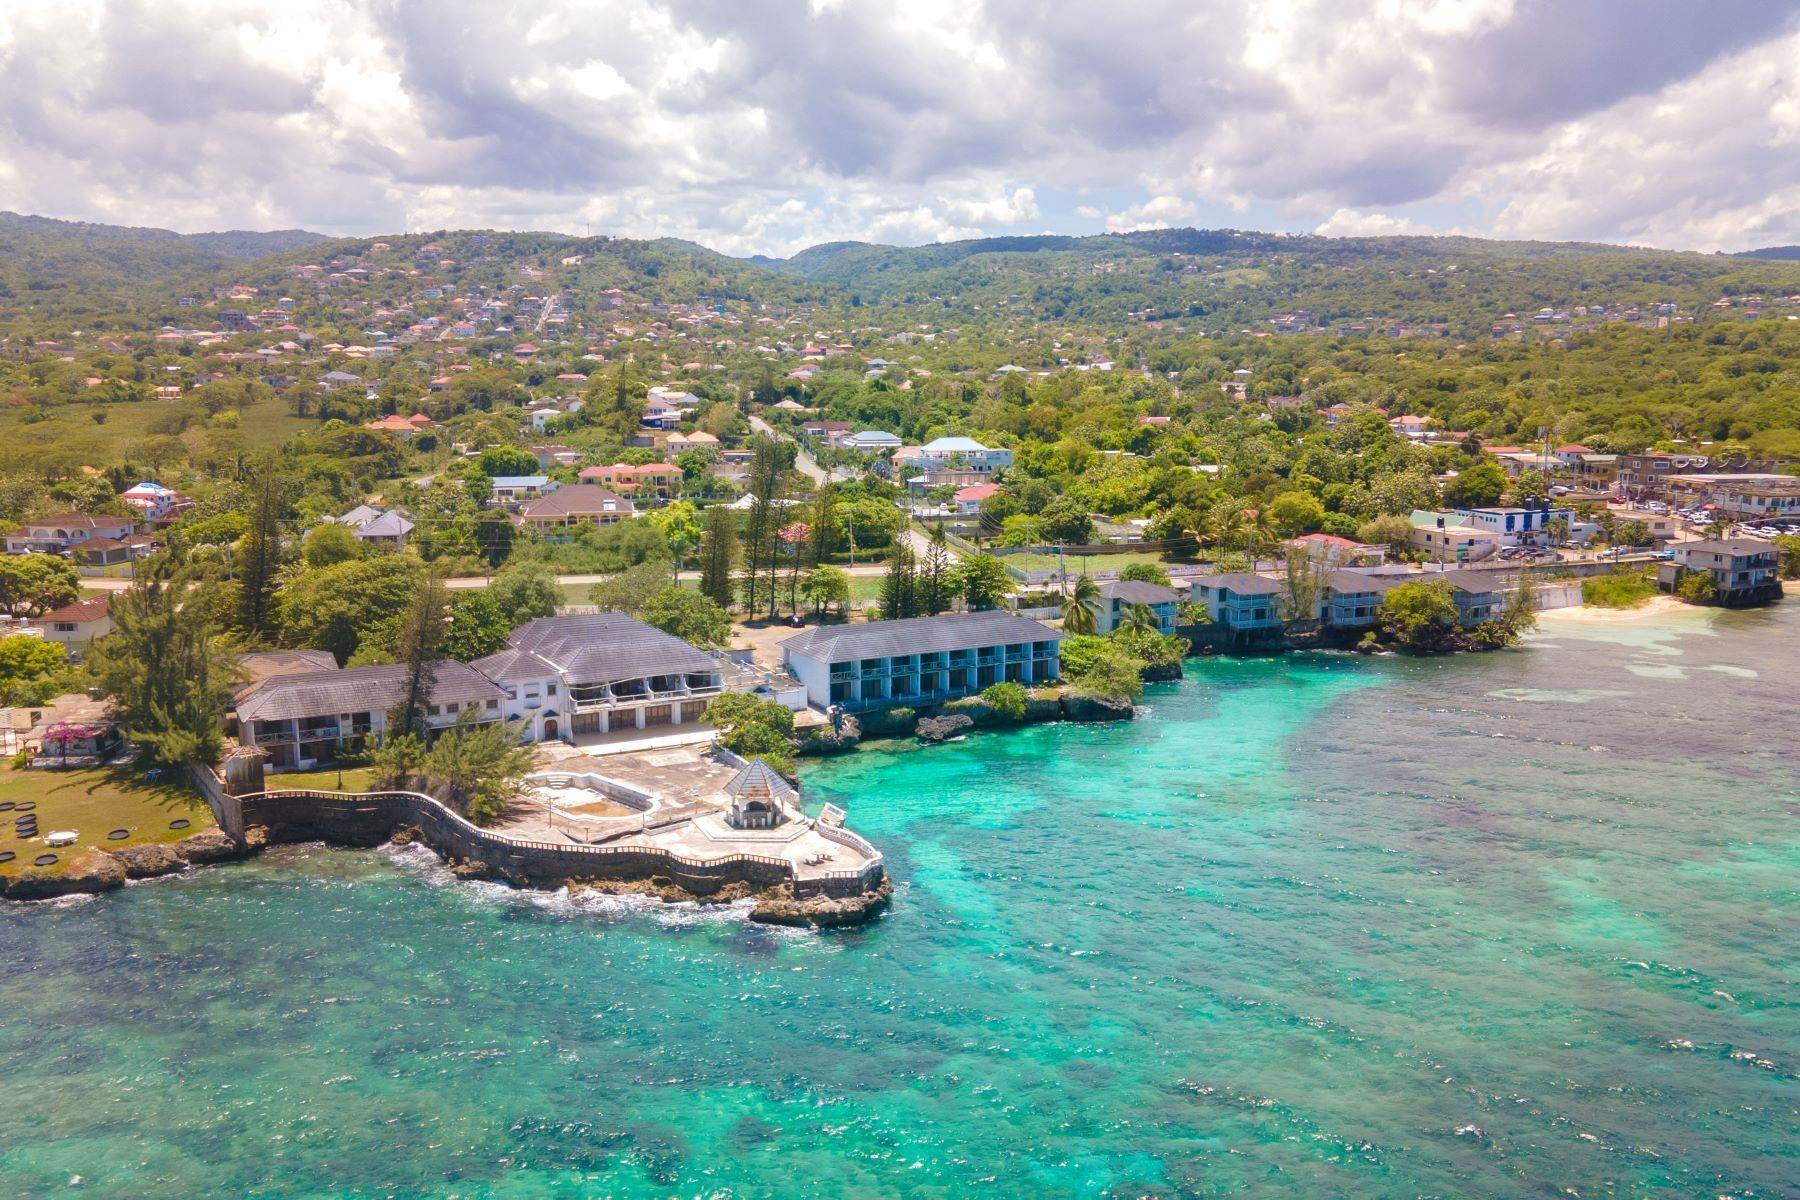 5. Bed and Breakfast Homes for Sale at Runaway Bay, Saint Ann, Jamaica